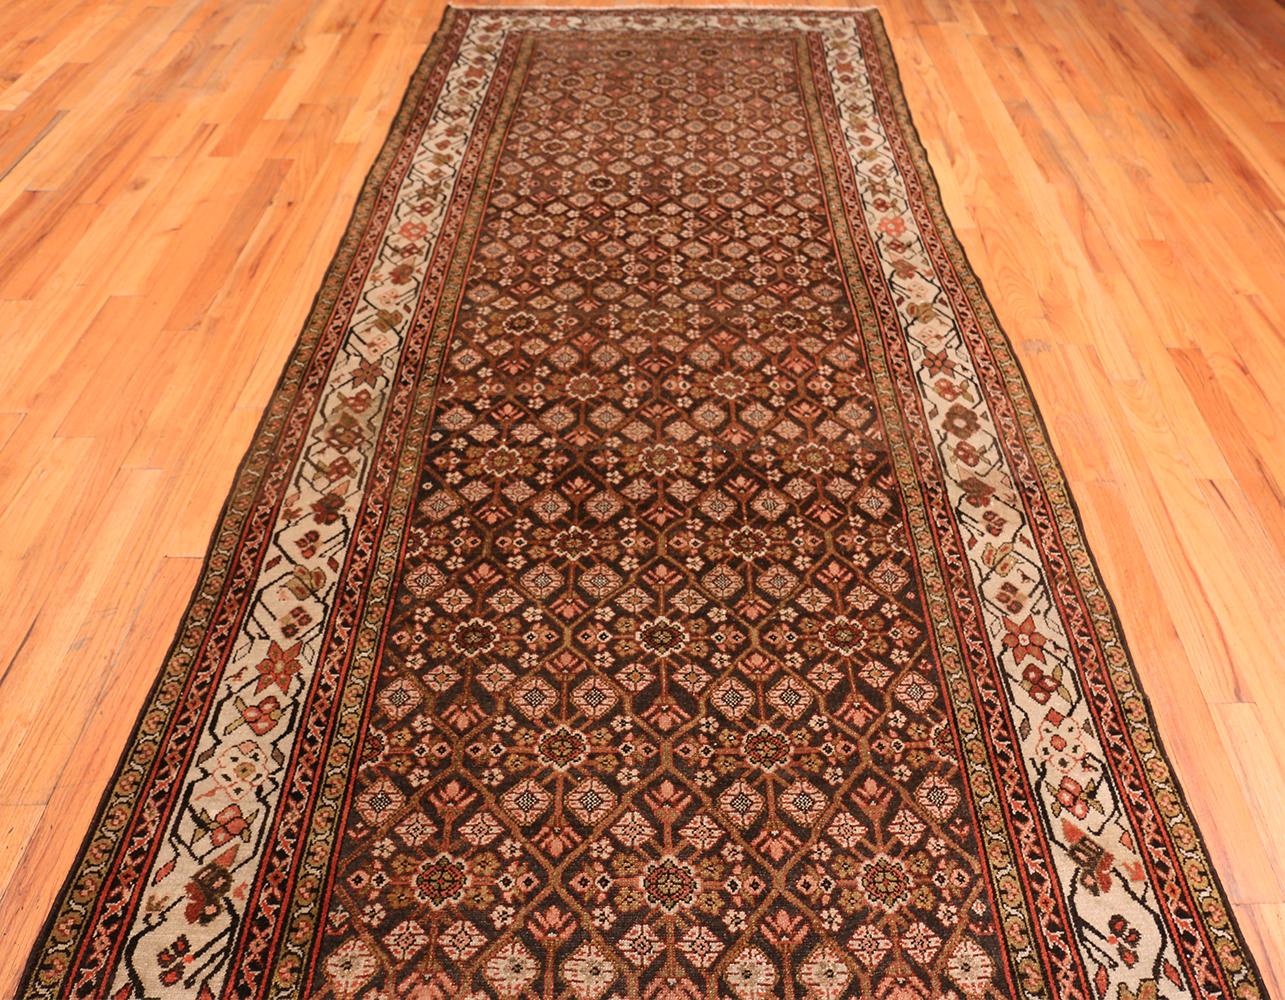 Antique Persian Malayer Runner Rug. Size: 5 ft 2 in x 16 ft 7 in 1